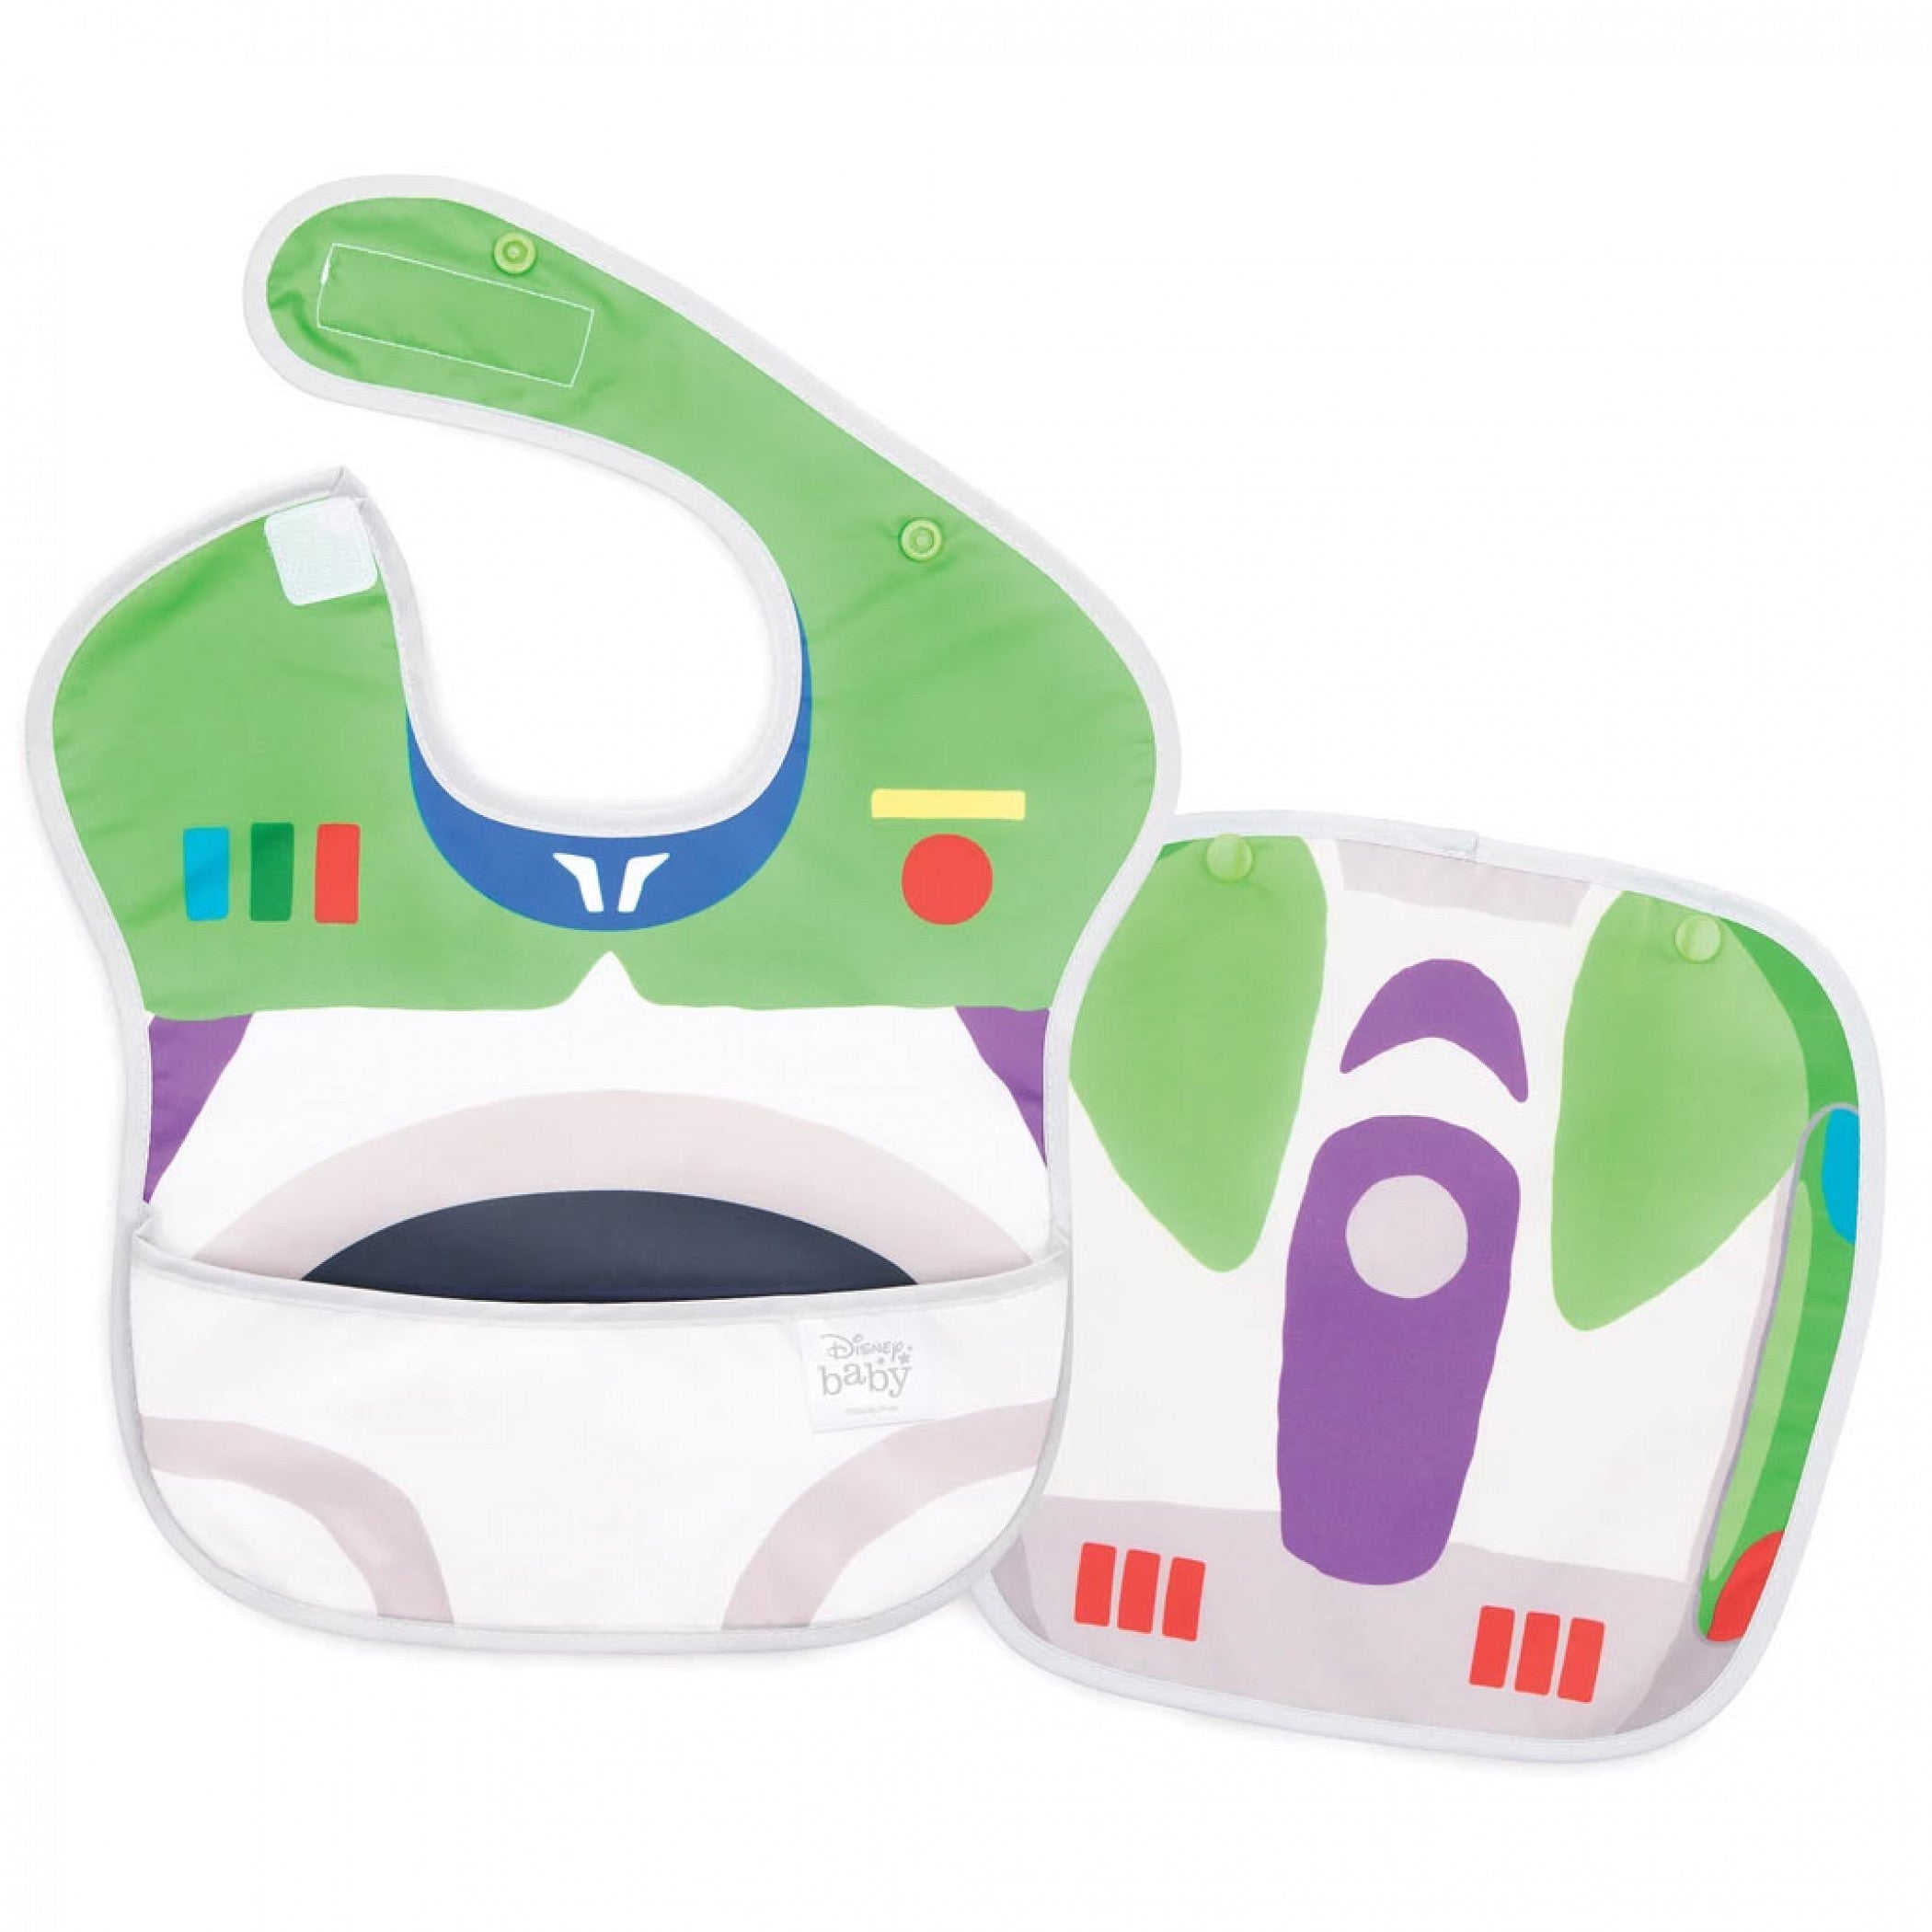 title:Toy Story Buzz Lightyear Bib;color:White